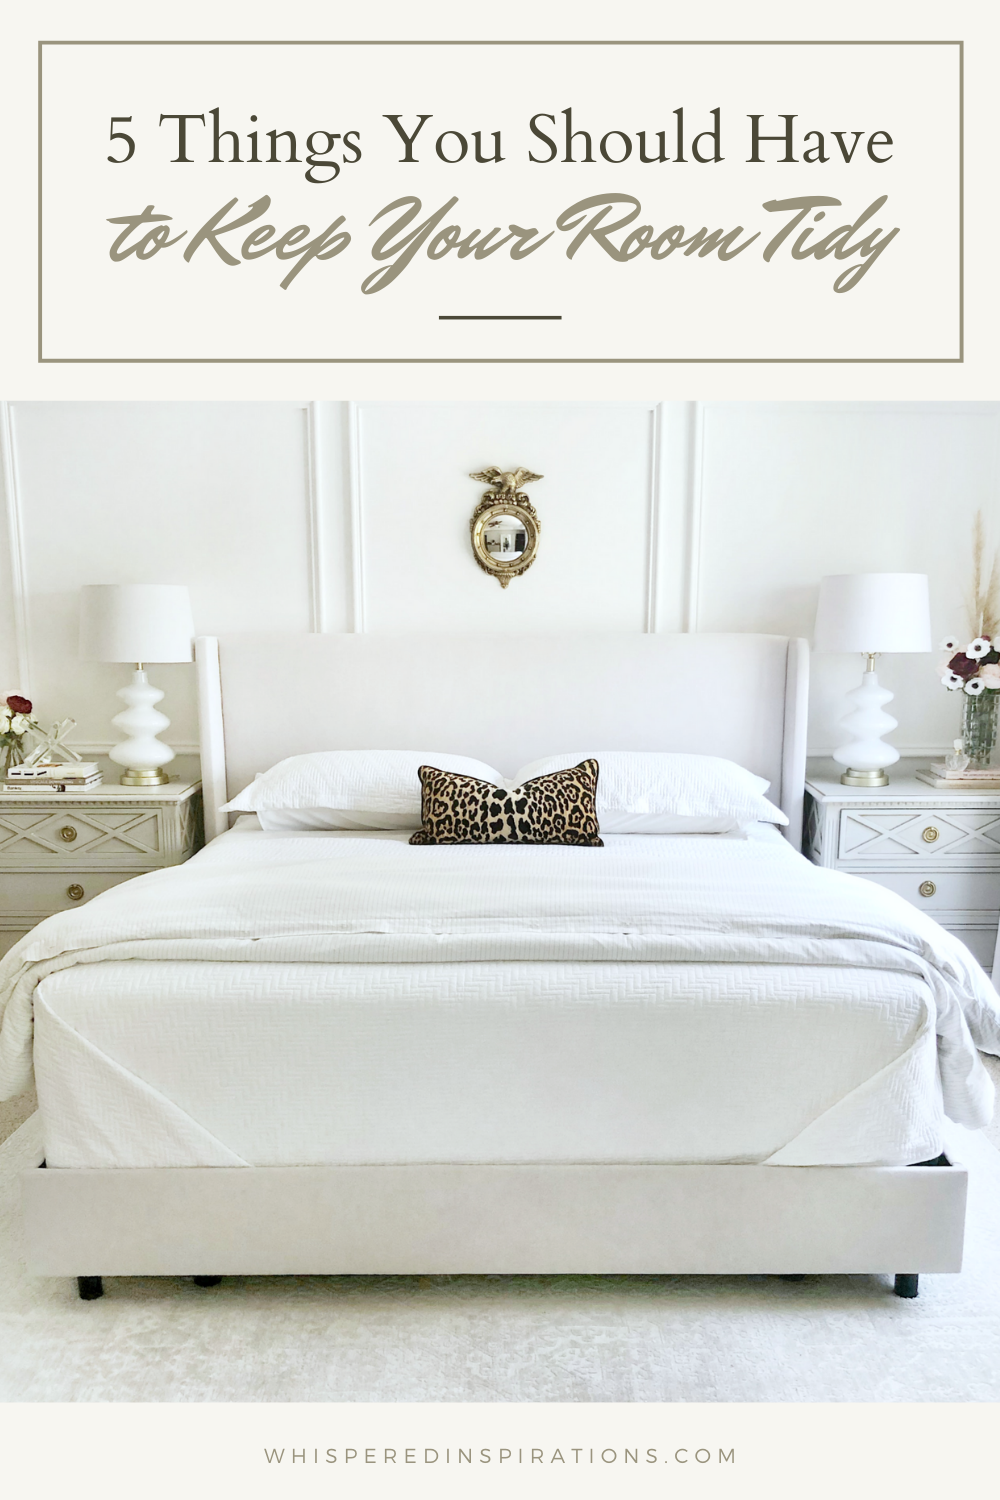 A beautiful, clean, white bedroom, that is tidy. It has a small mirror above the bed. The bedroom is to signify and share the 5 things you should have in your room to keep it tidy.